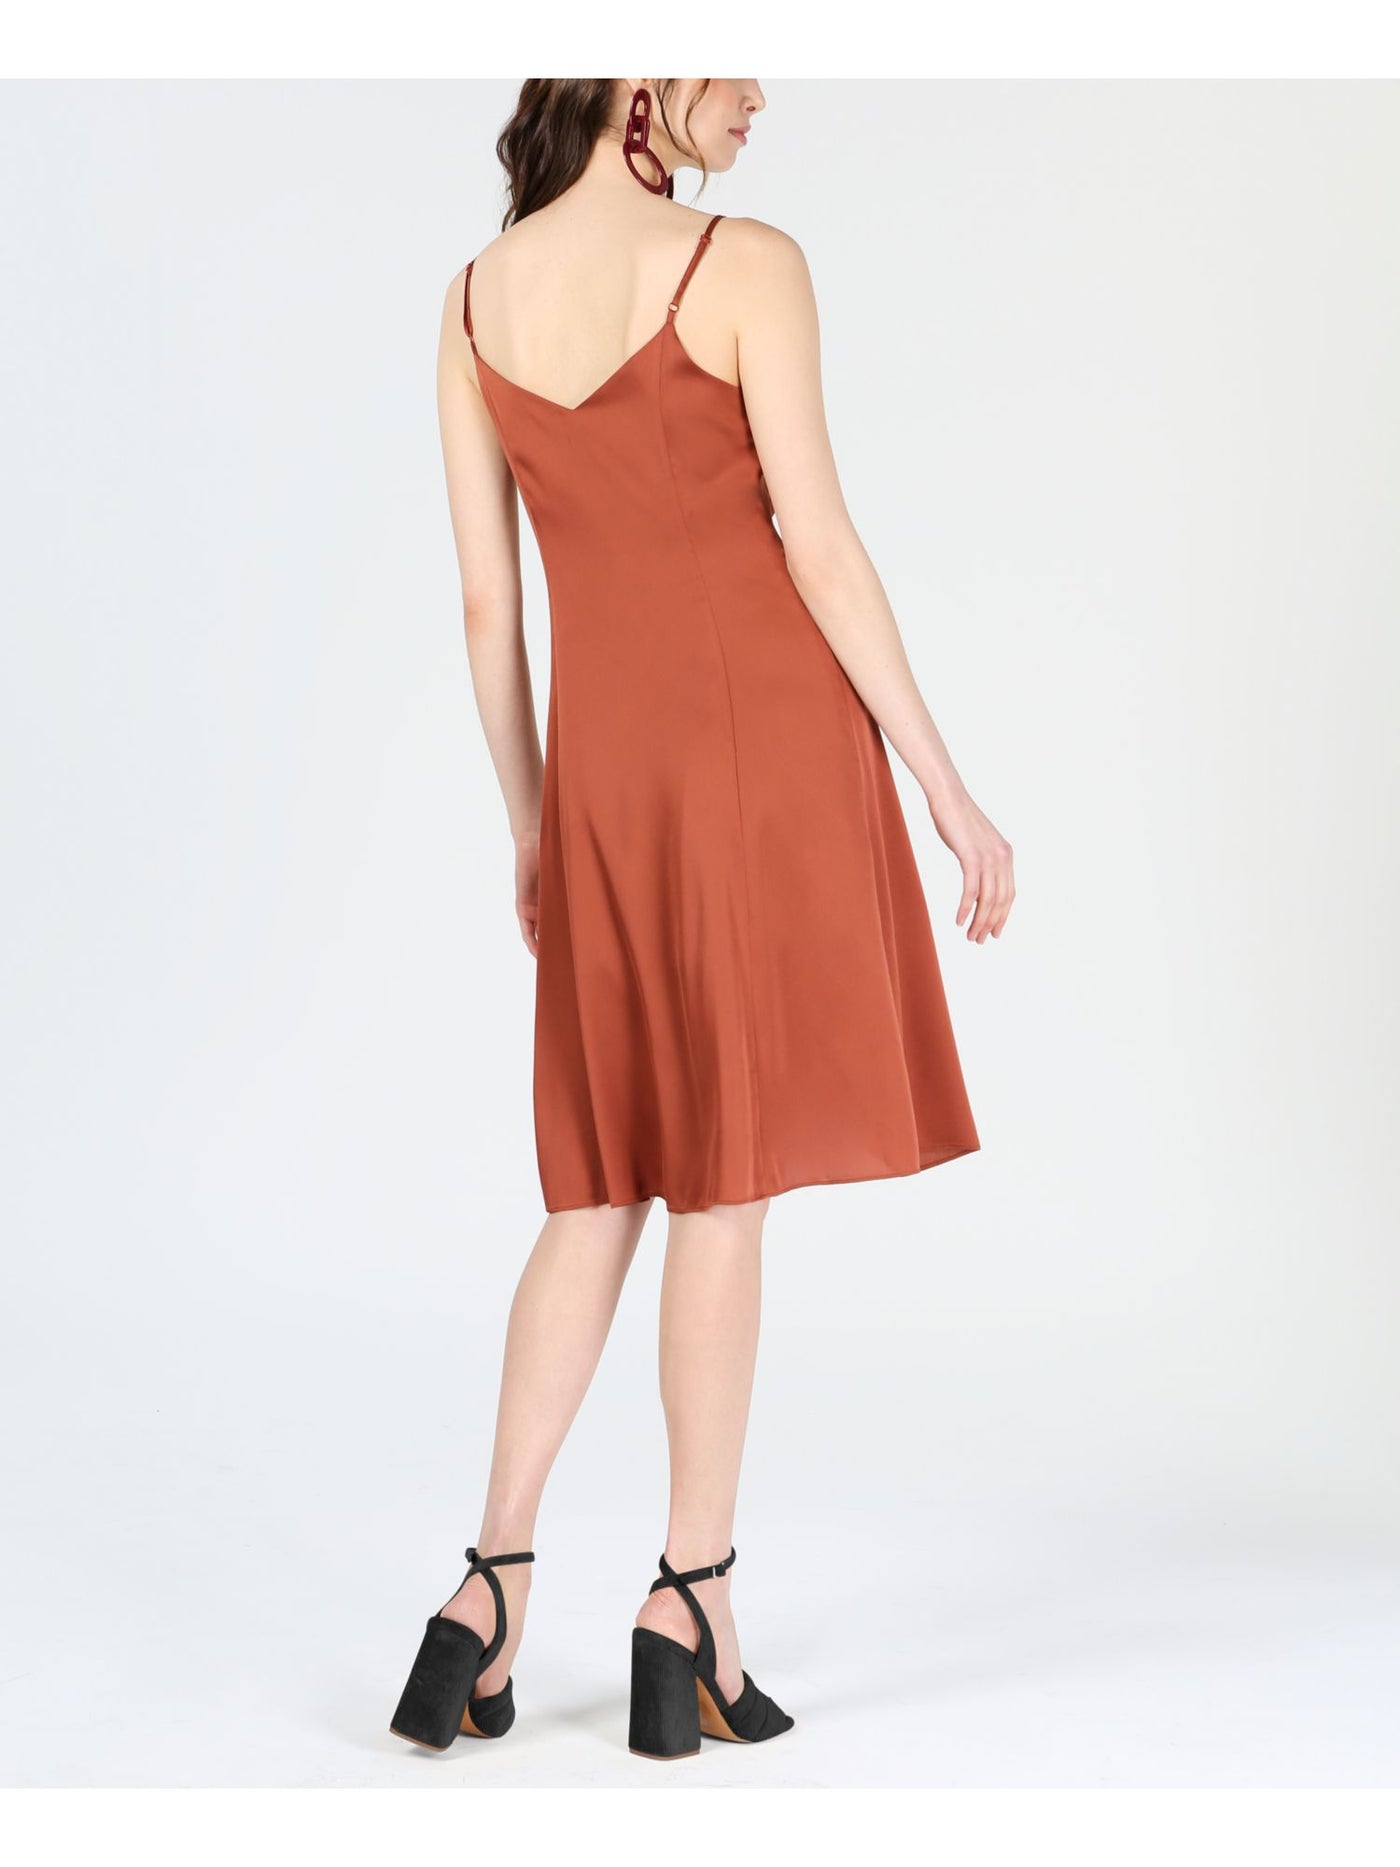 BAR III Womens Brown Ruffled Spaghetti Strap V Neck Below The Knee Party Fit + Flare Dress 2XS